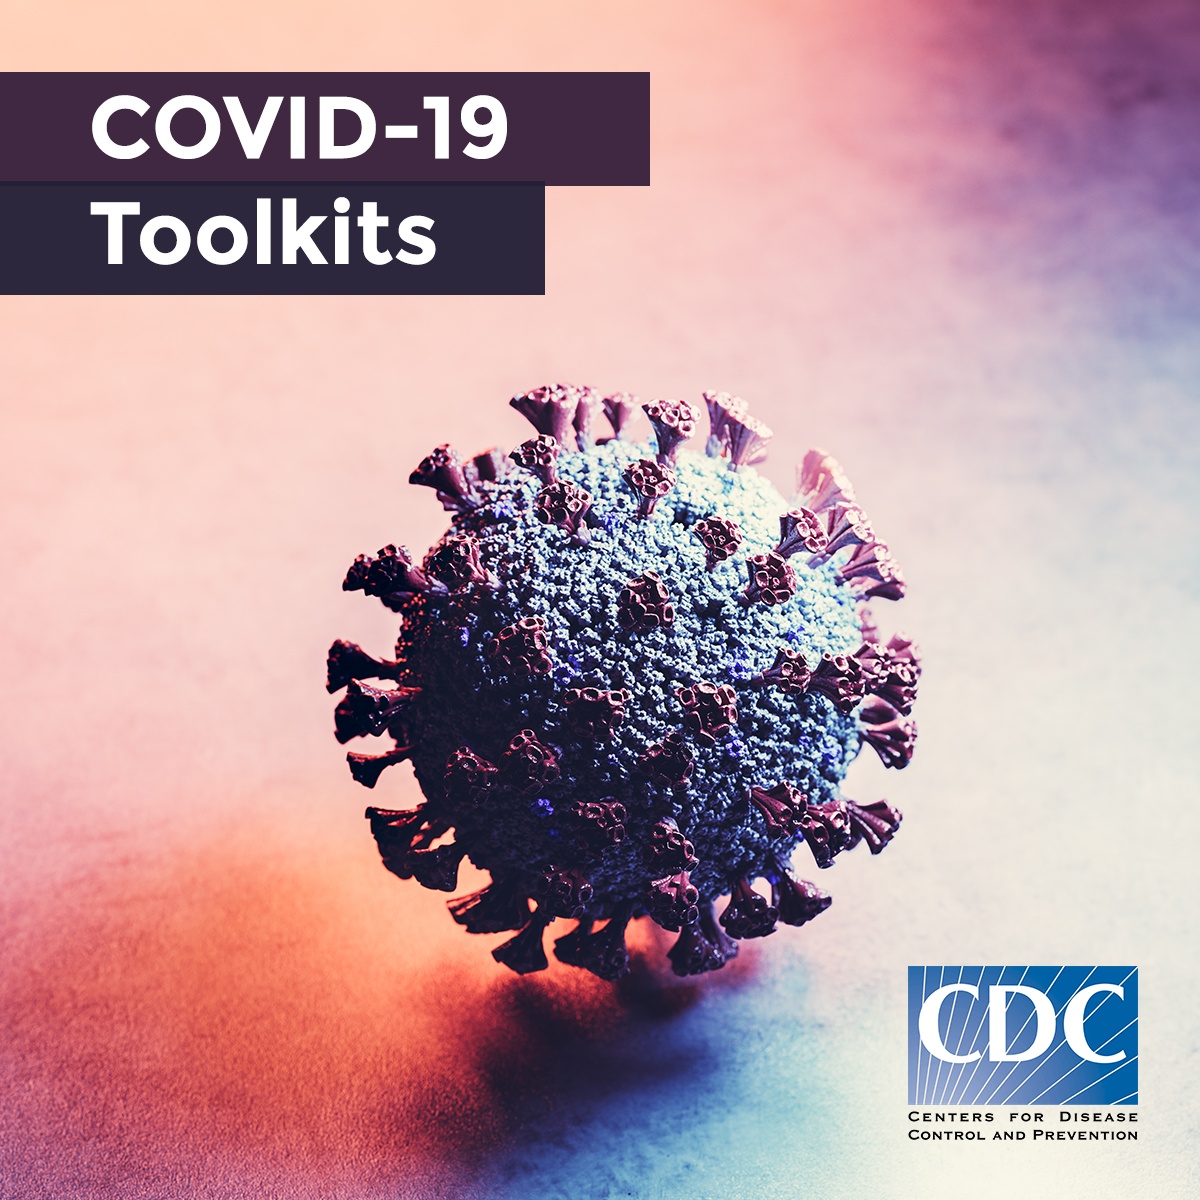 Covid-19 Toolkits by the CDC